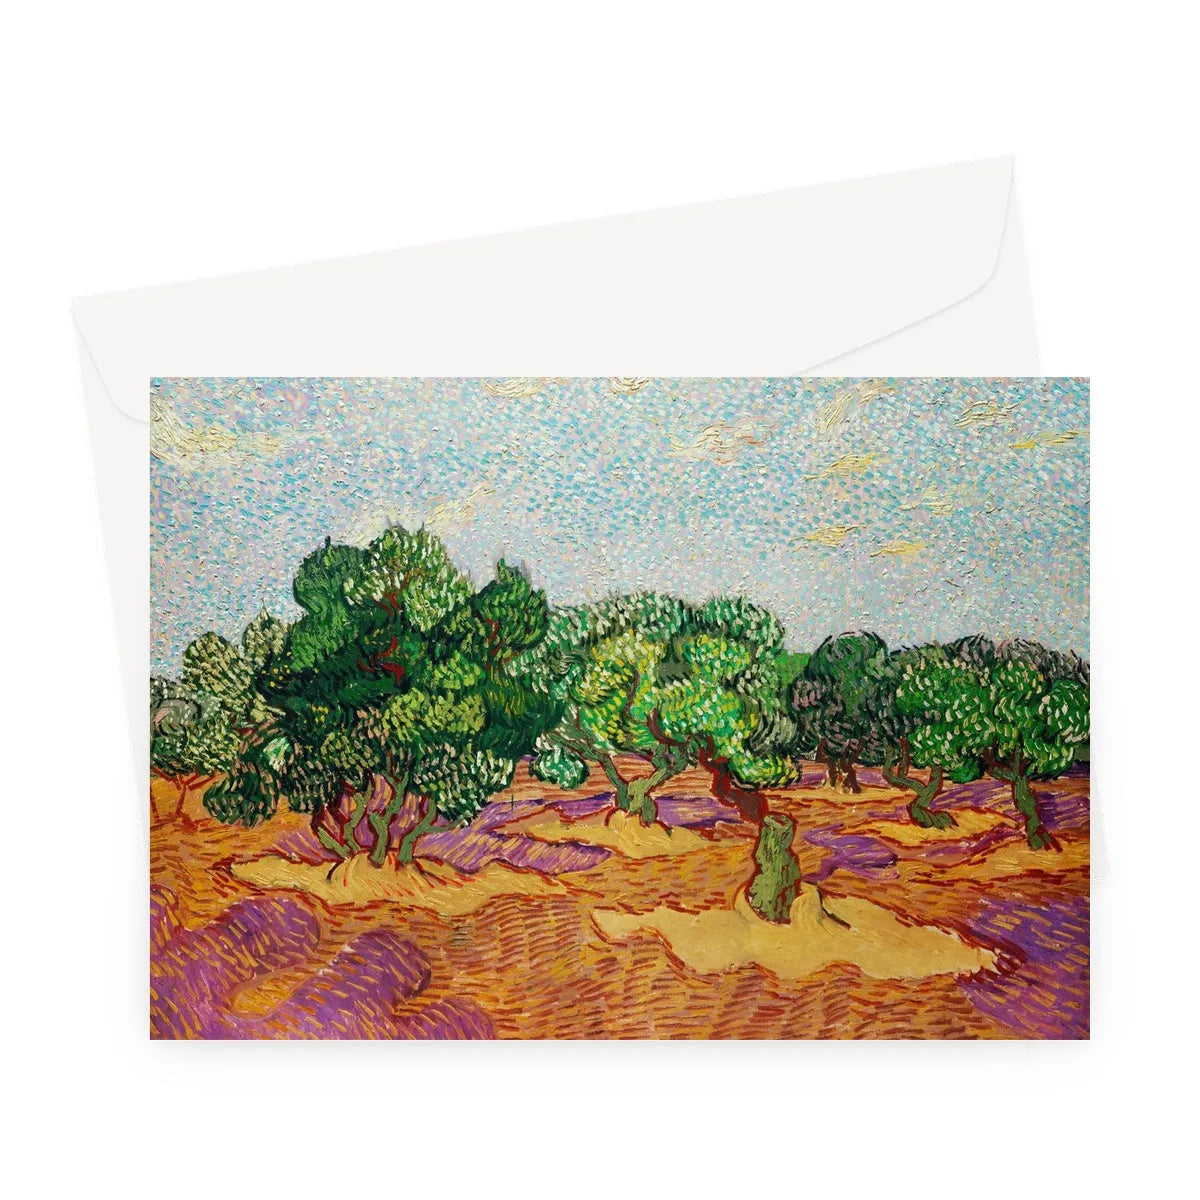 Olive Trees - Vincent Van Gogh Greeting Card - A5 Landscape / 1 Card - Greeting & Note Cards - Aesthetic Art